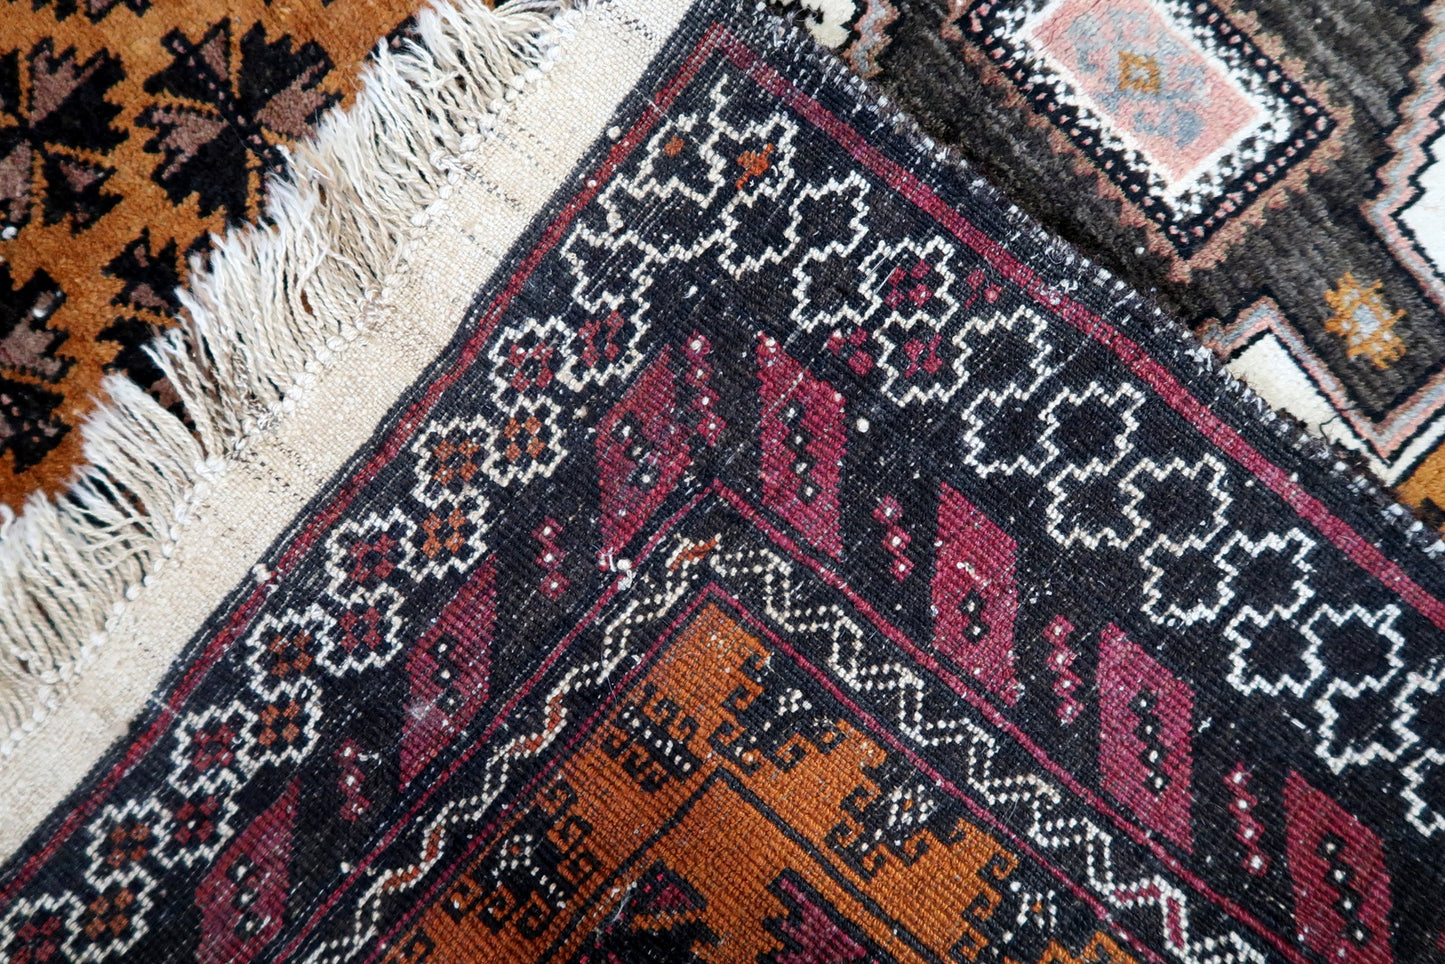 Back view of the vintage Afghan Baluch rug highlighting its craftsmanship and size